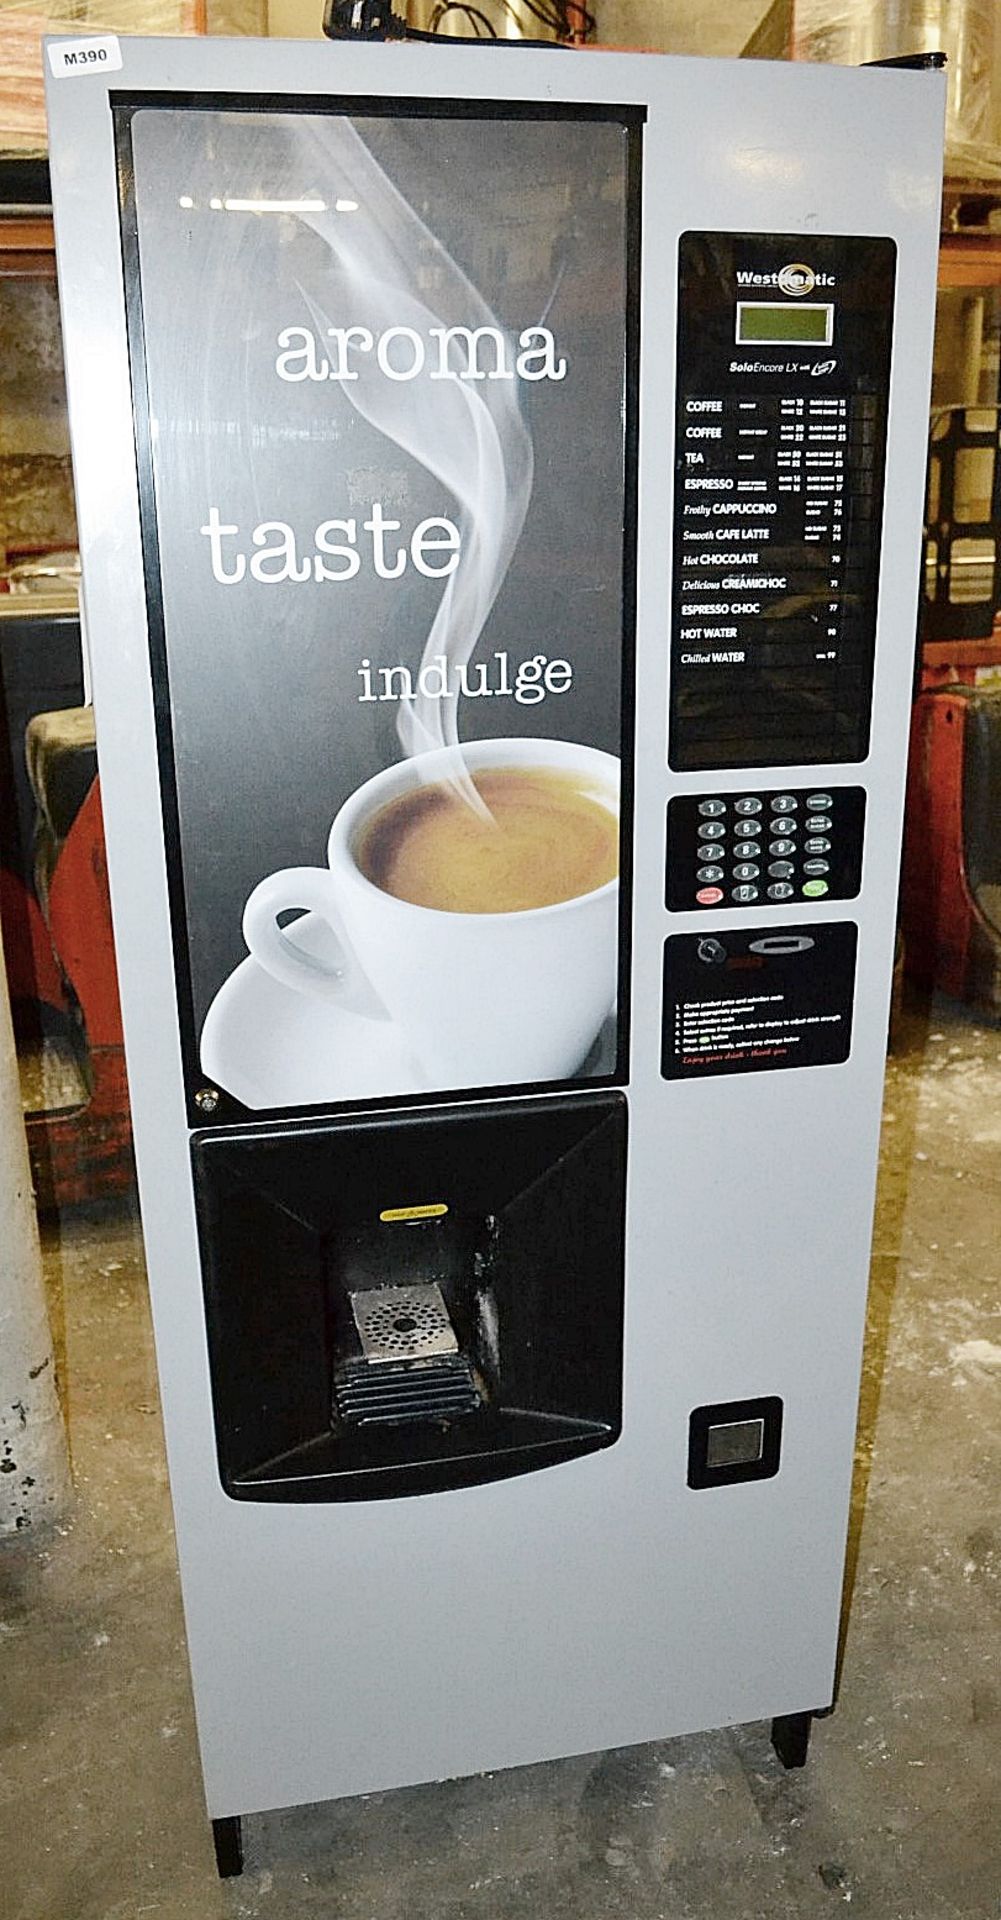 1 x Westomatic Solo Encore LX Hot Drink Vending Machine With Sim Logic - Ref: M390 - Image 5 of 6